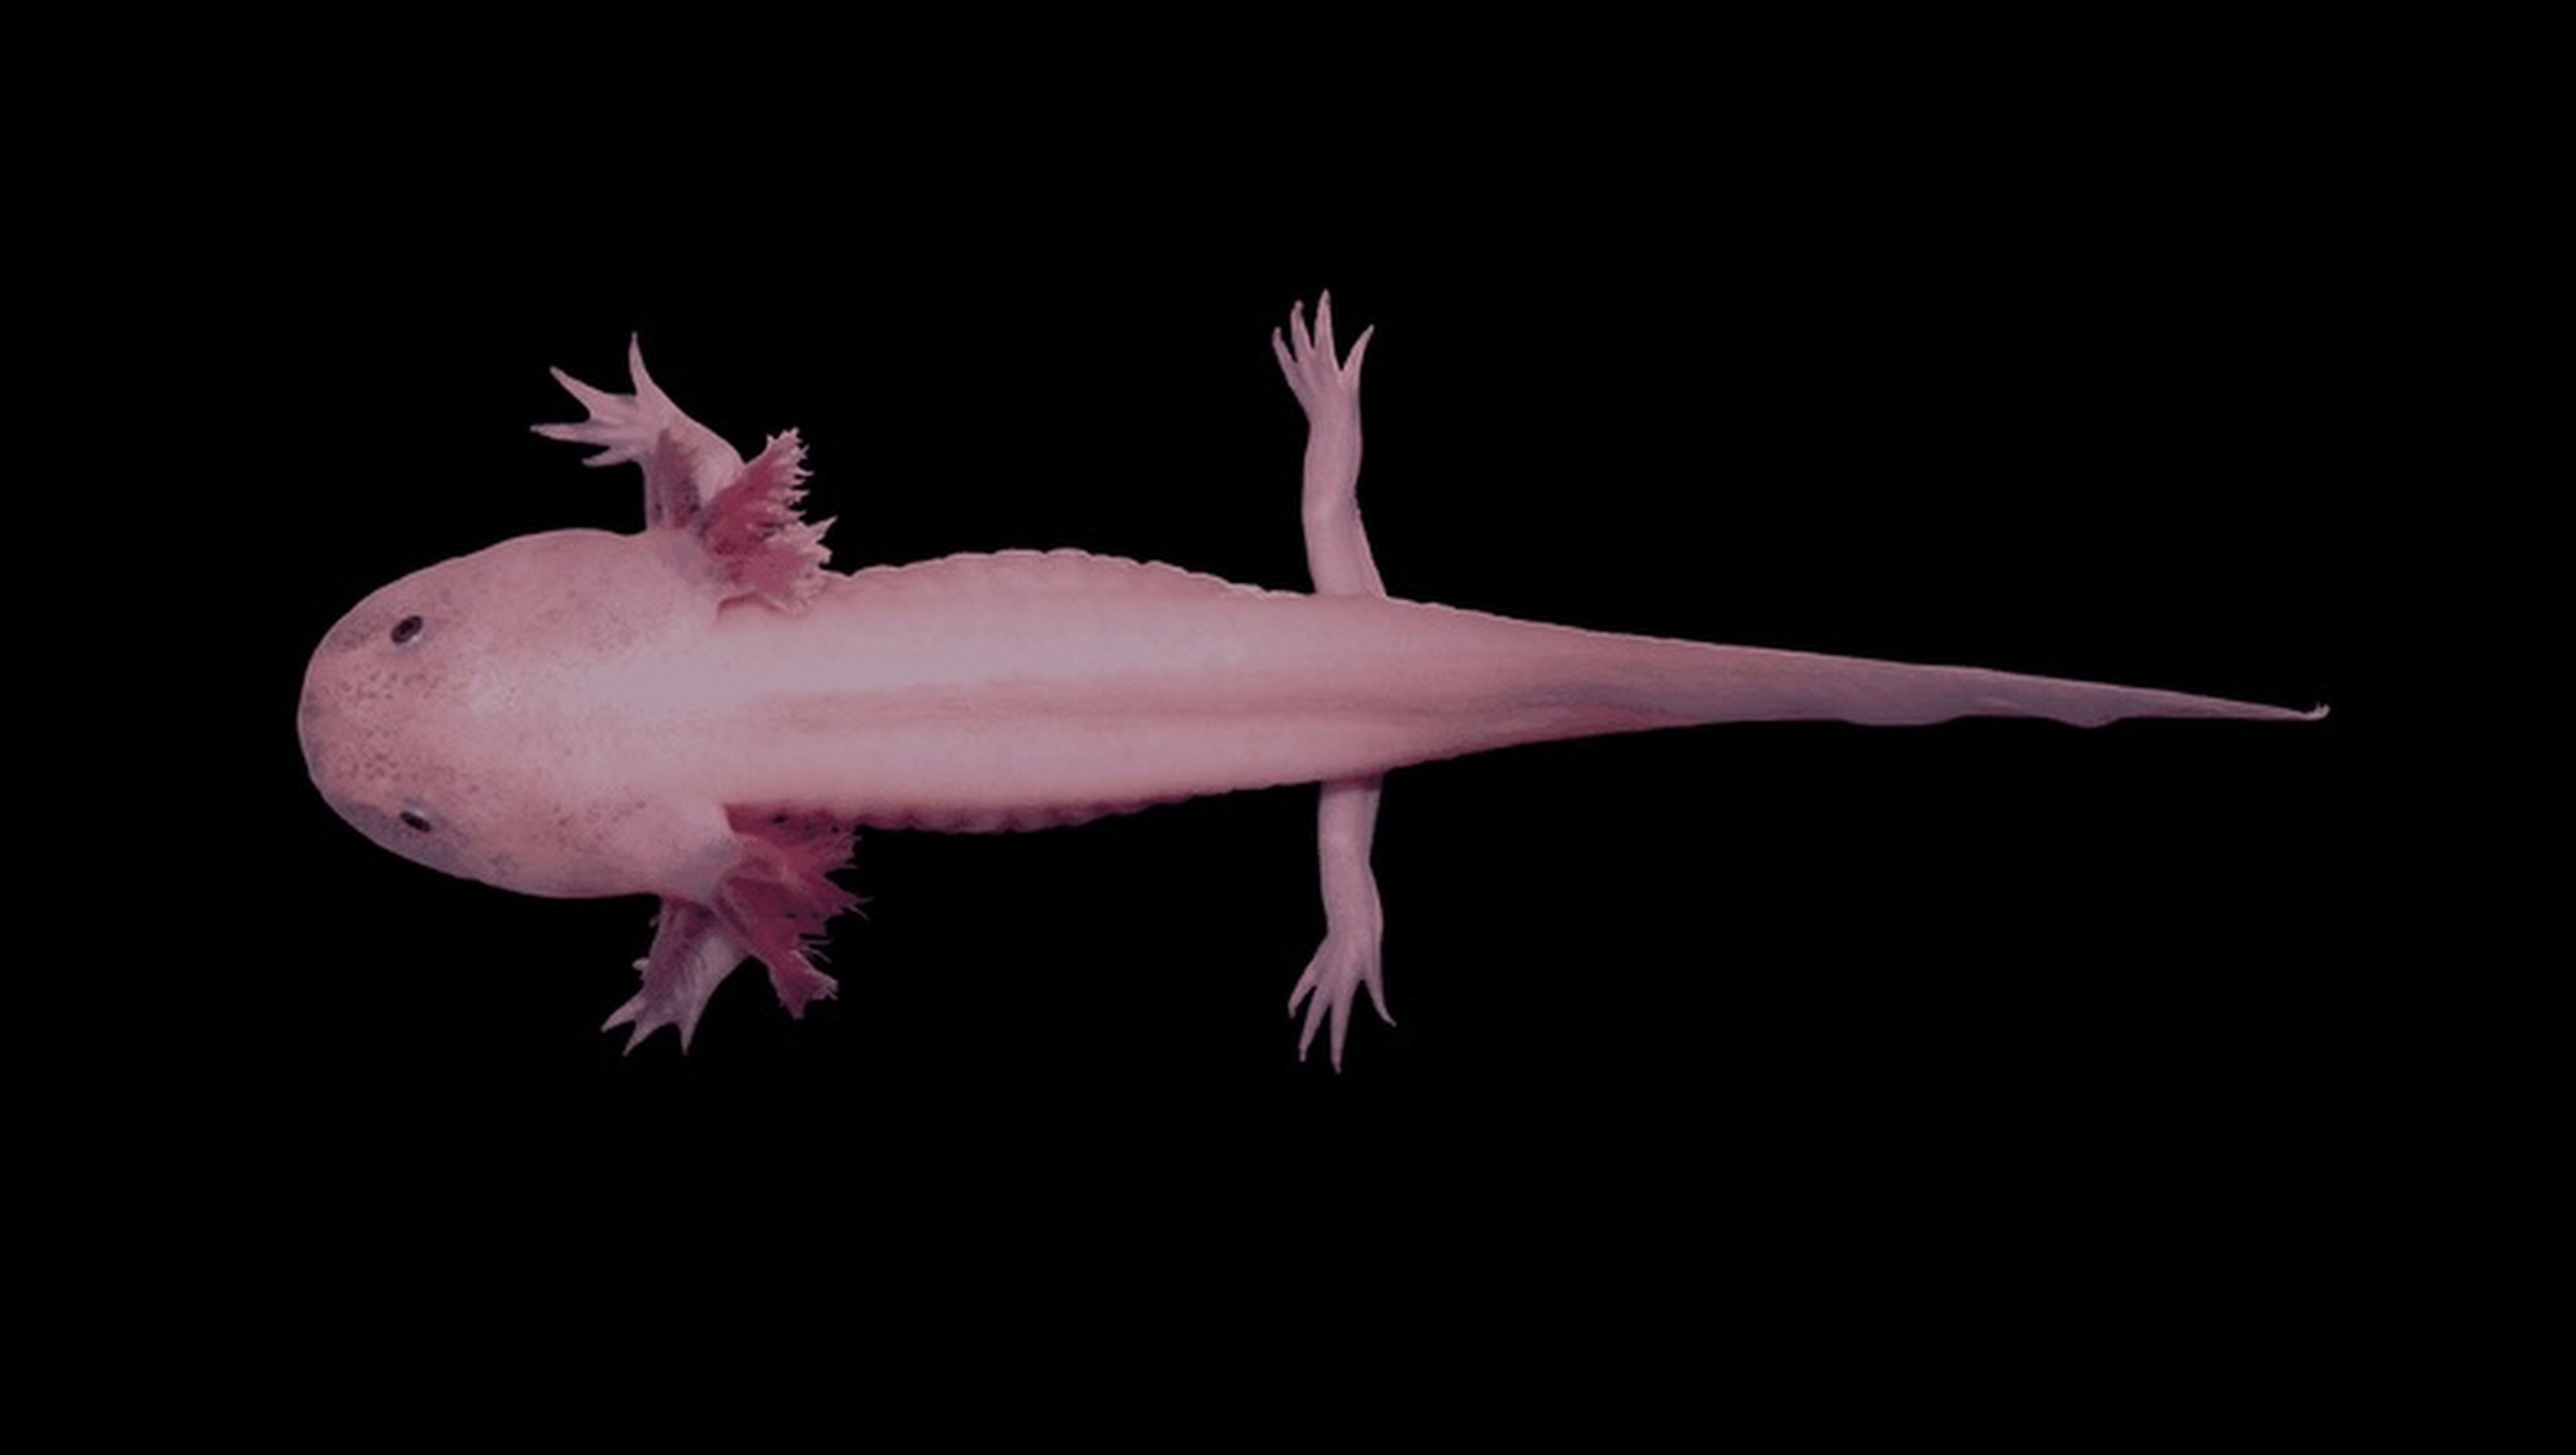 Chinese scientists find axolotl's ability to regenerate after injury may  hold key to human brain health | South China Morning Post